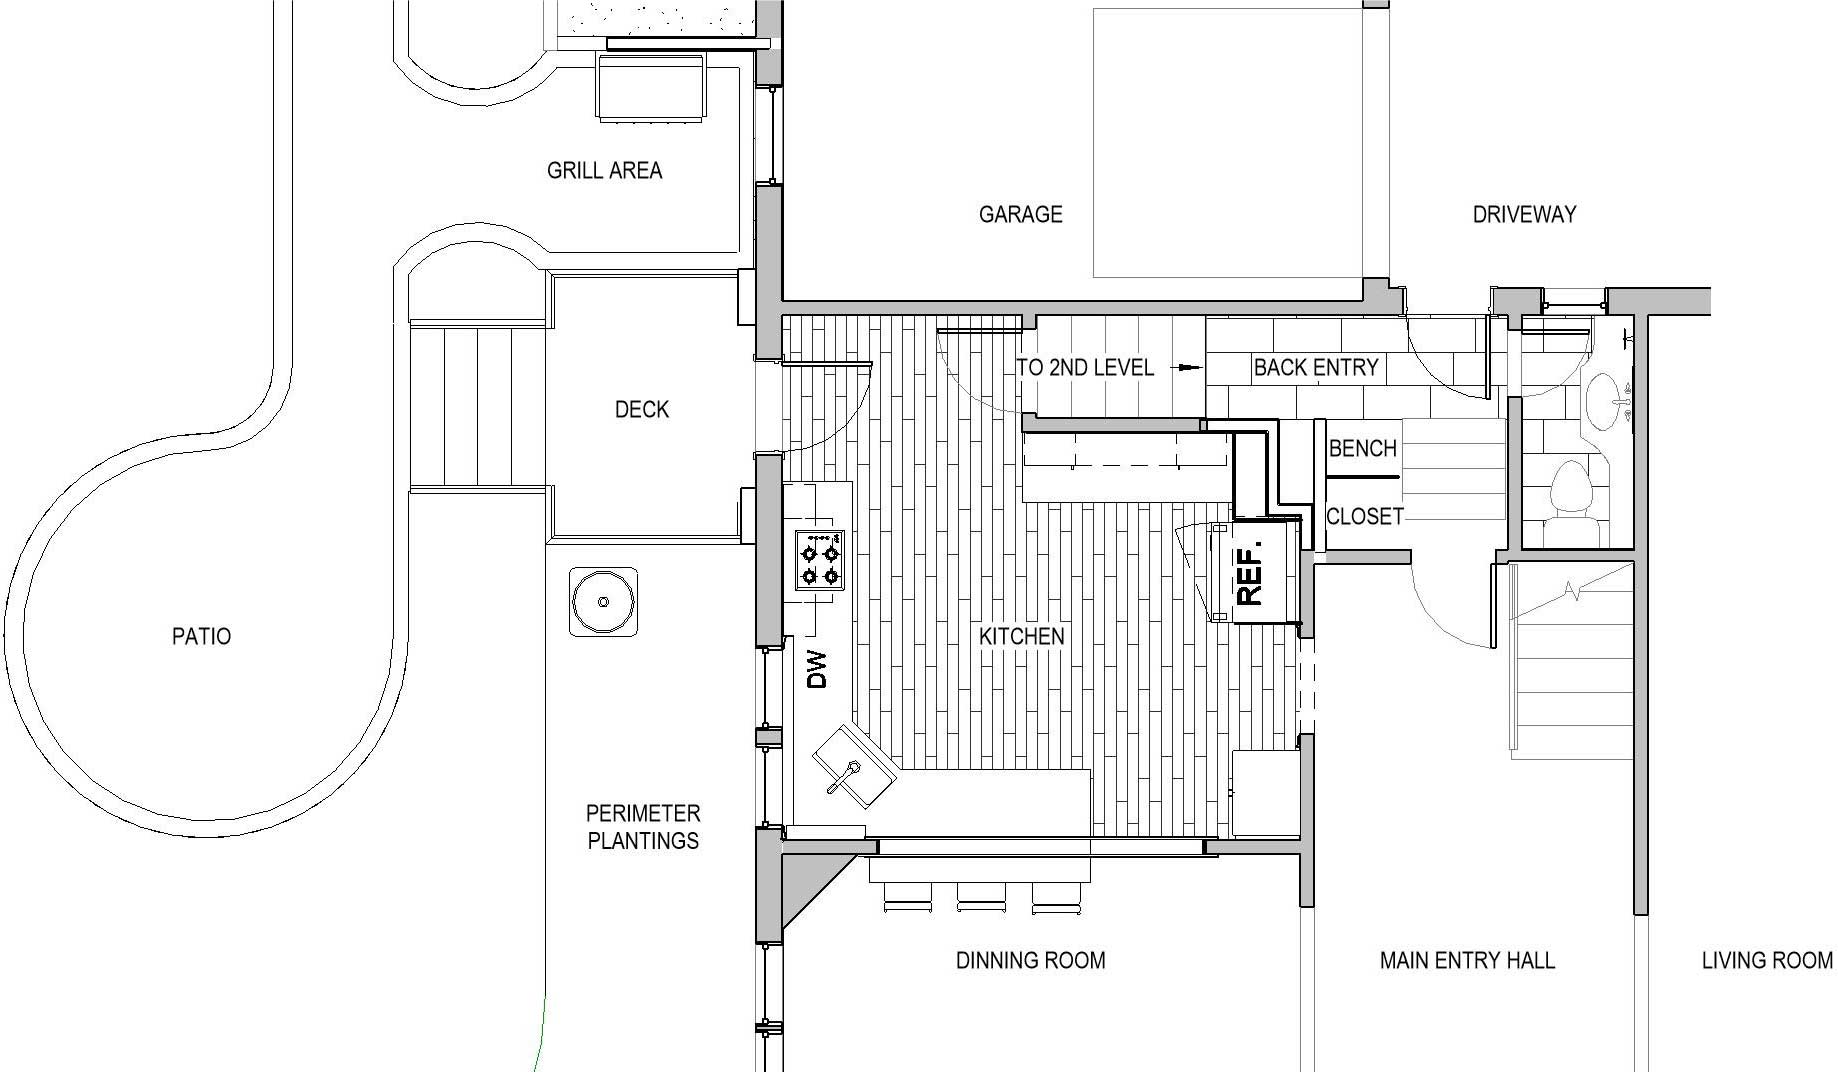 redesigned floor plan to remodel Des Moines tudor house kitchen, dining room, back entry and patio with access to pool by Silent Rivers